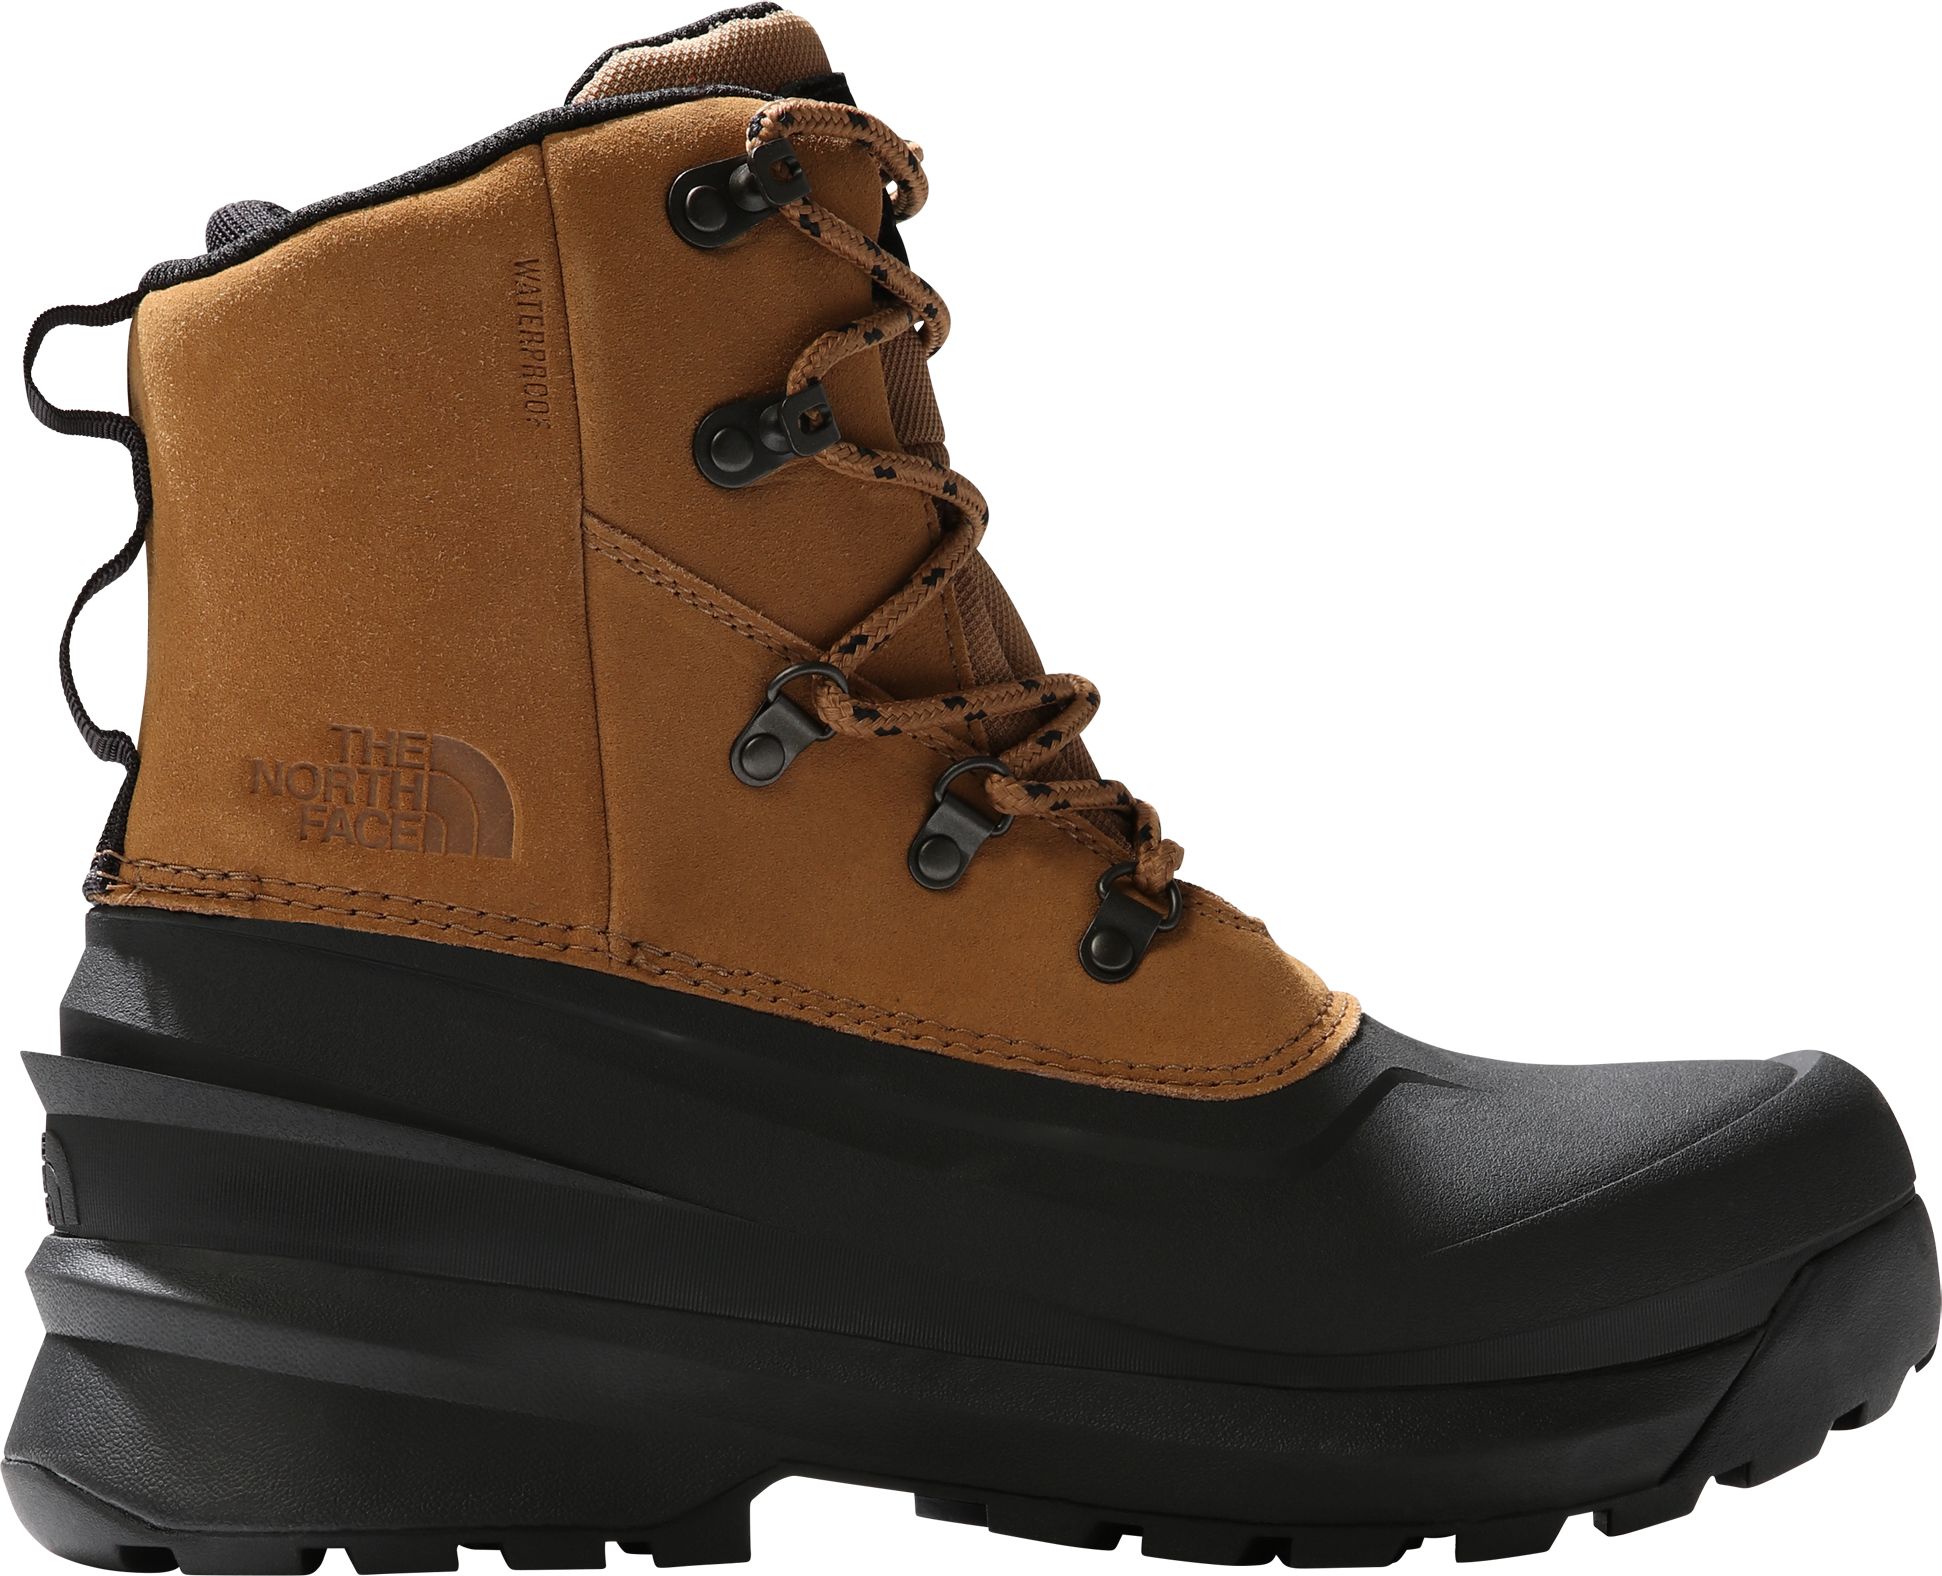 THE NORTH FACE, M CHILKAT V LACE WP